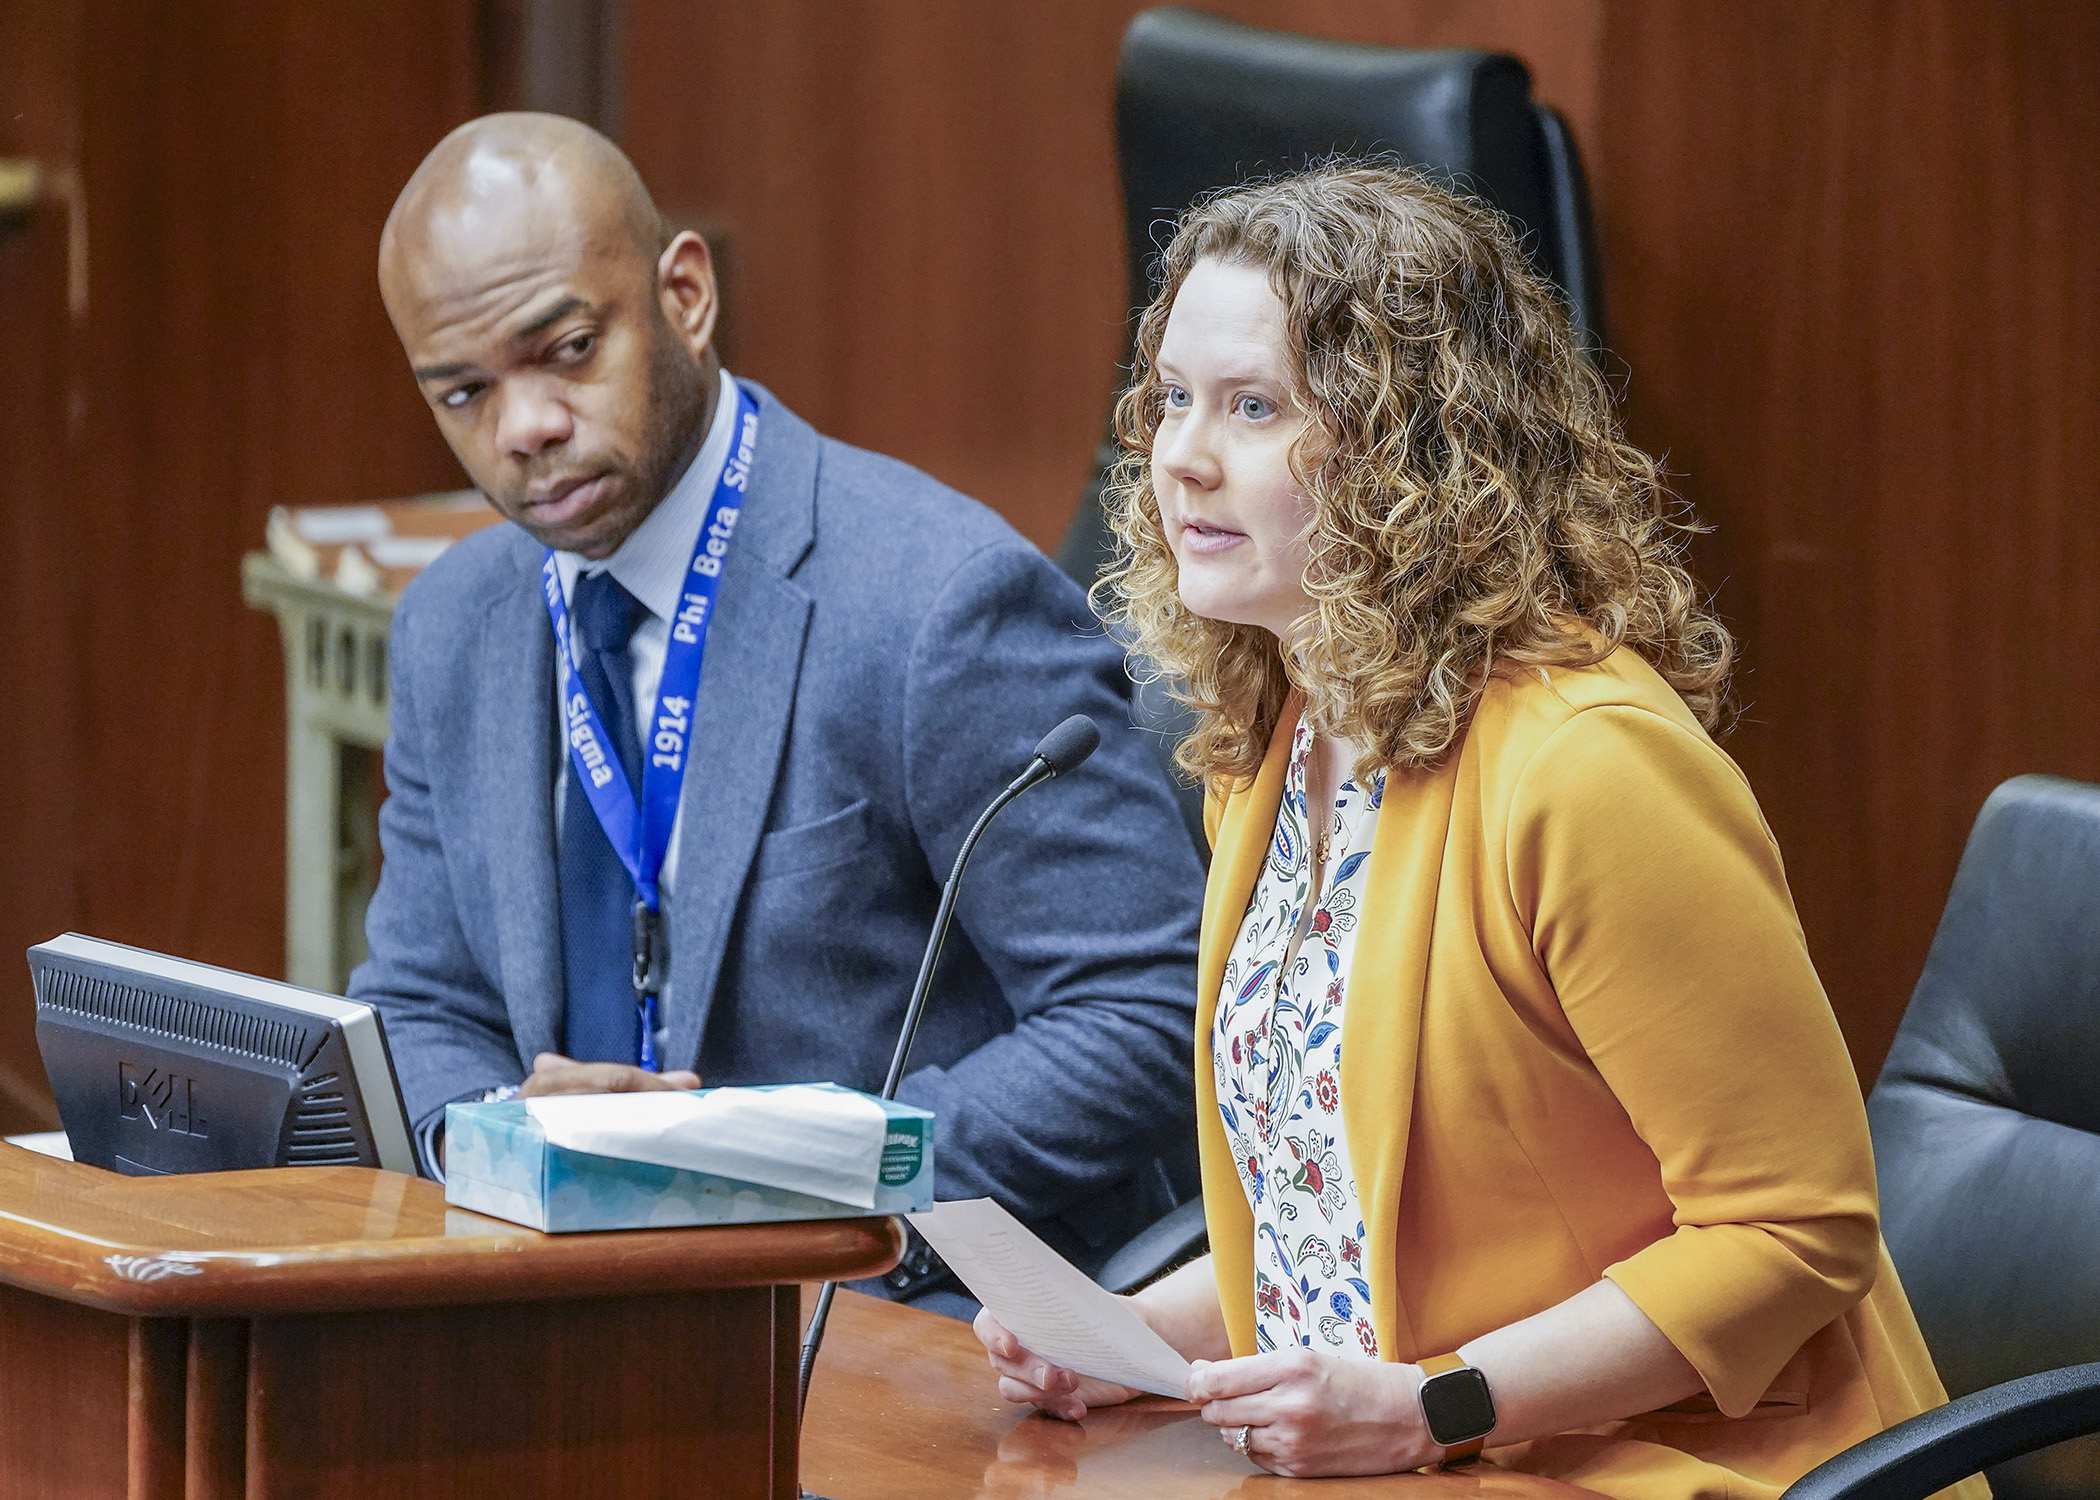 Bloomington City Clerk Christina Scipioni testifies before the elections committee March 13 in support of a bill sponsored by Rep. Cedrick Frazier, left, that could provide for ranked-choice voting. (Photo by Andrew VonBank)